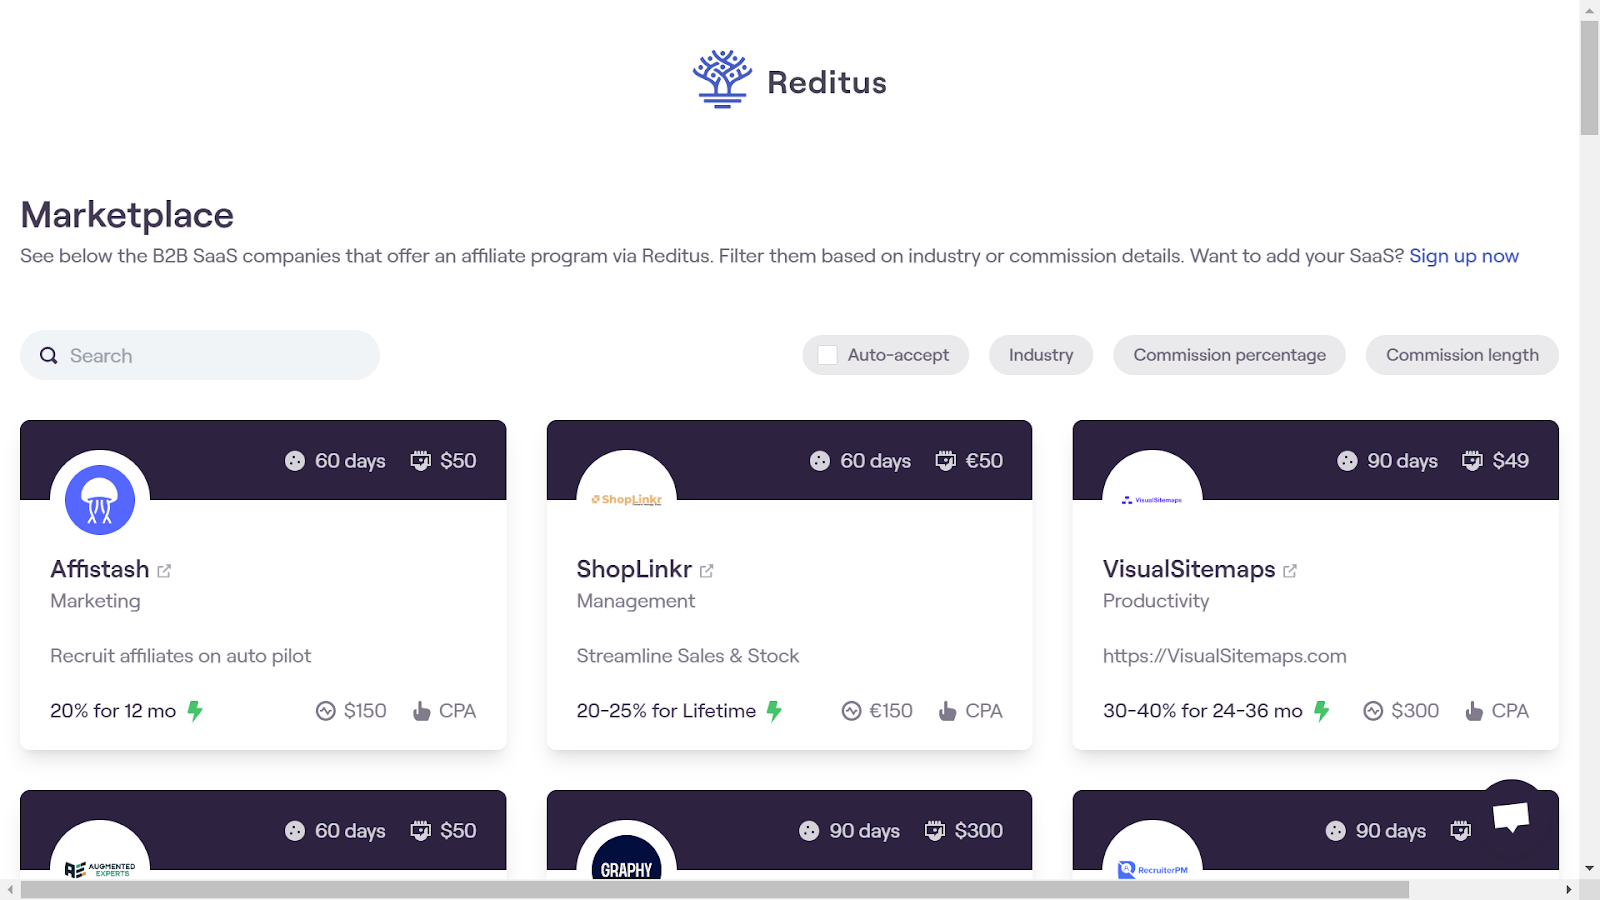 A screenshot from the Reditus Marketplace landing page.